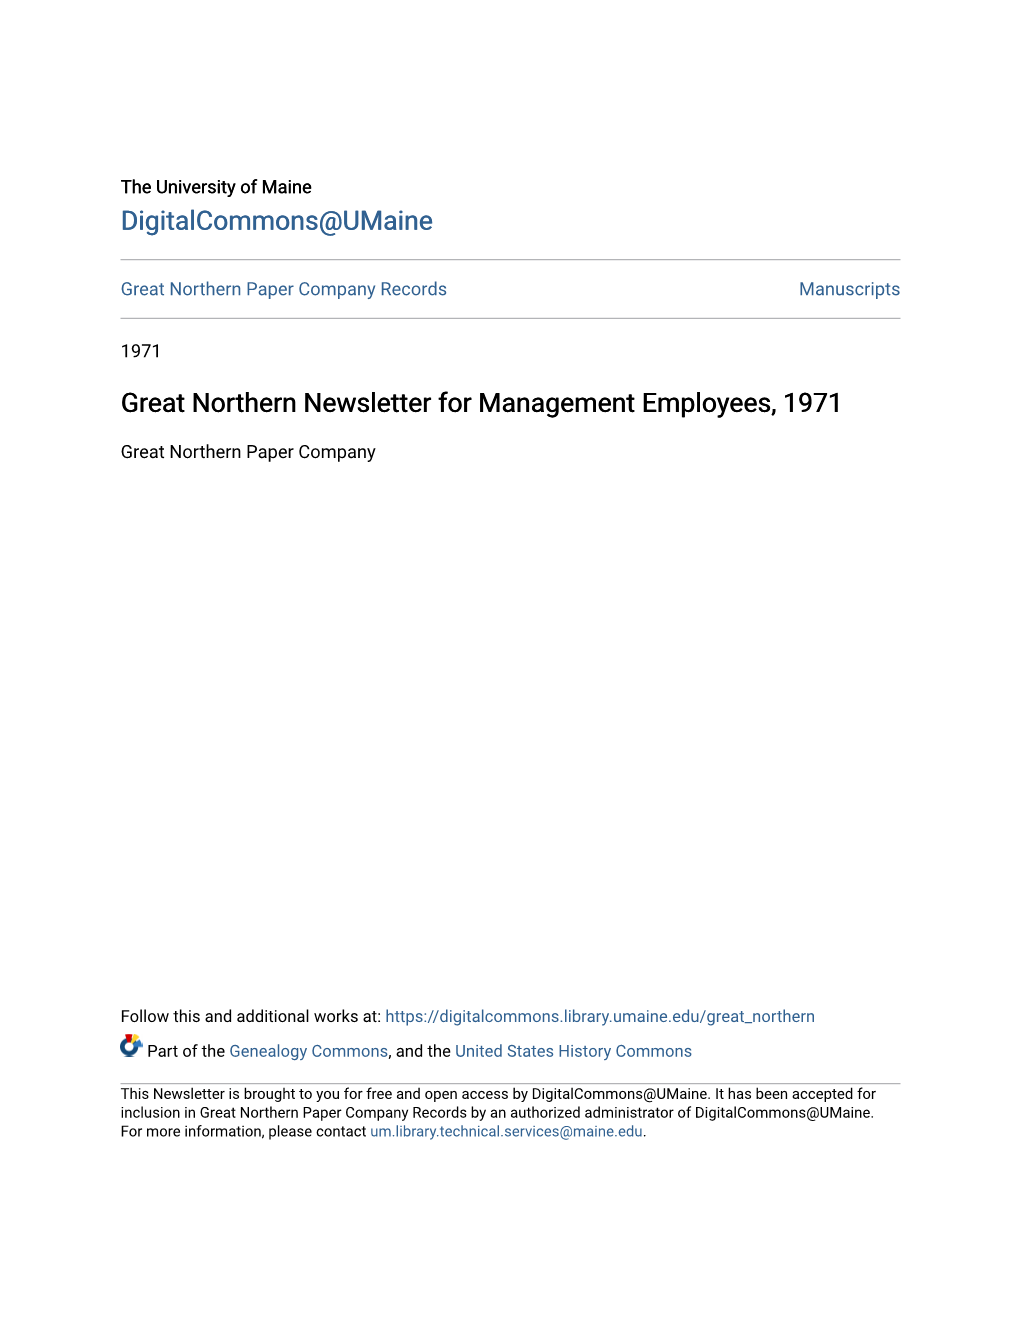 Great Northern Newsletter for Management Employees, 1971